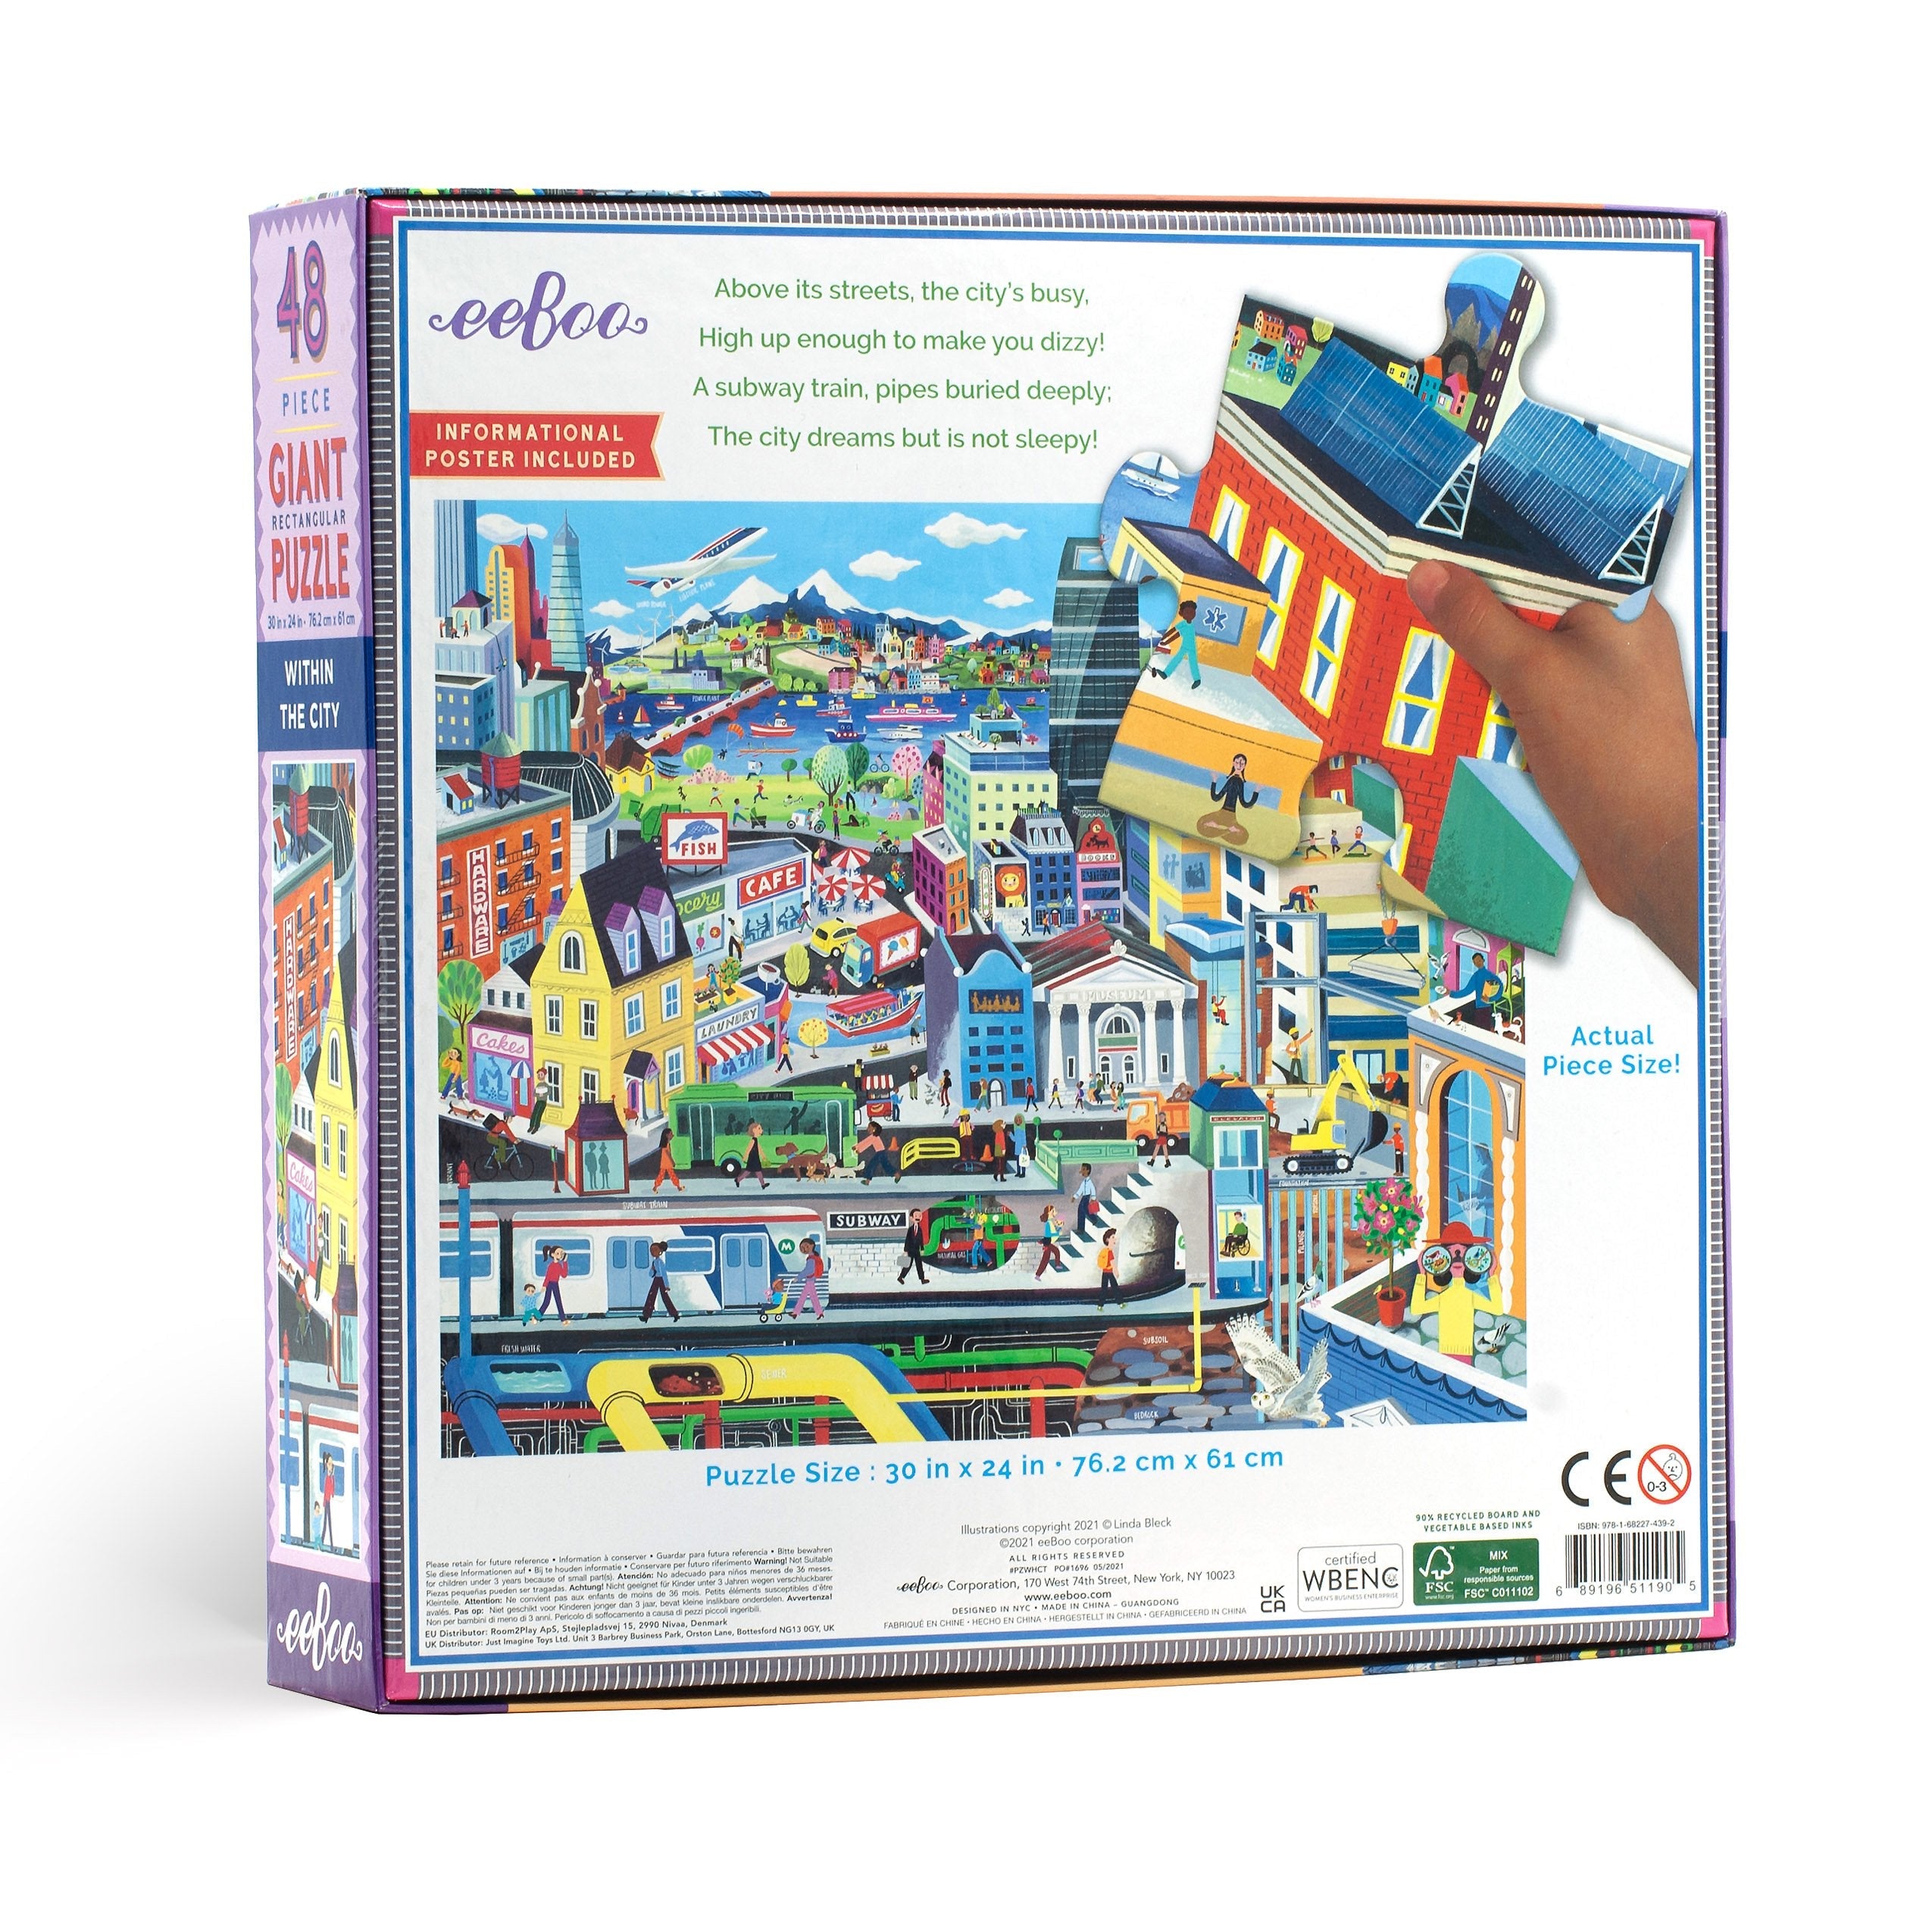 Within the City 48 Piece Giant Eeboo Puzzle